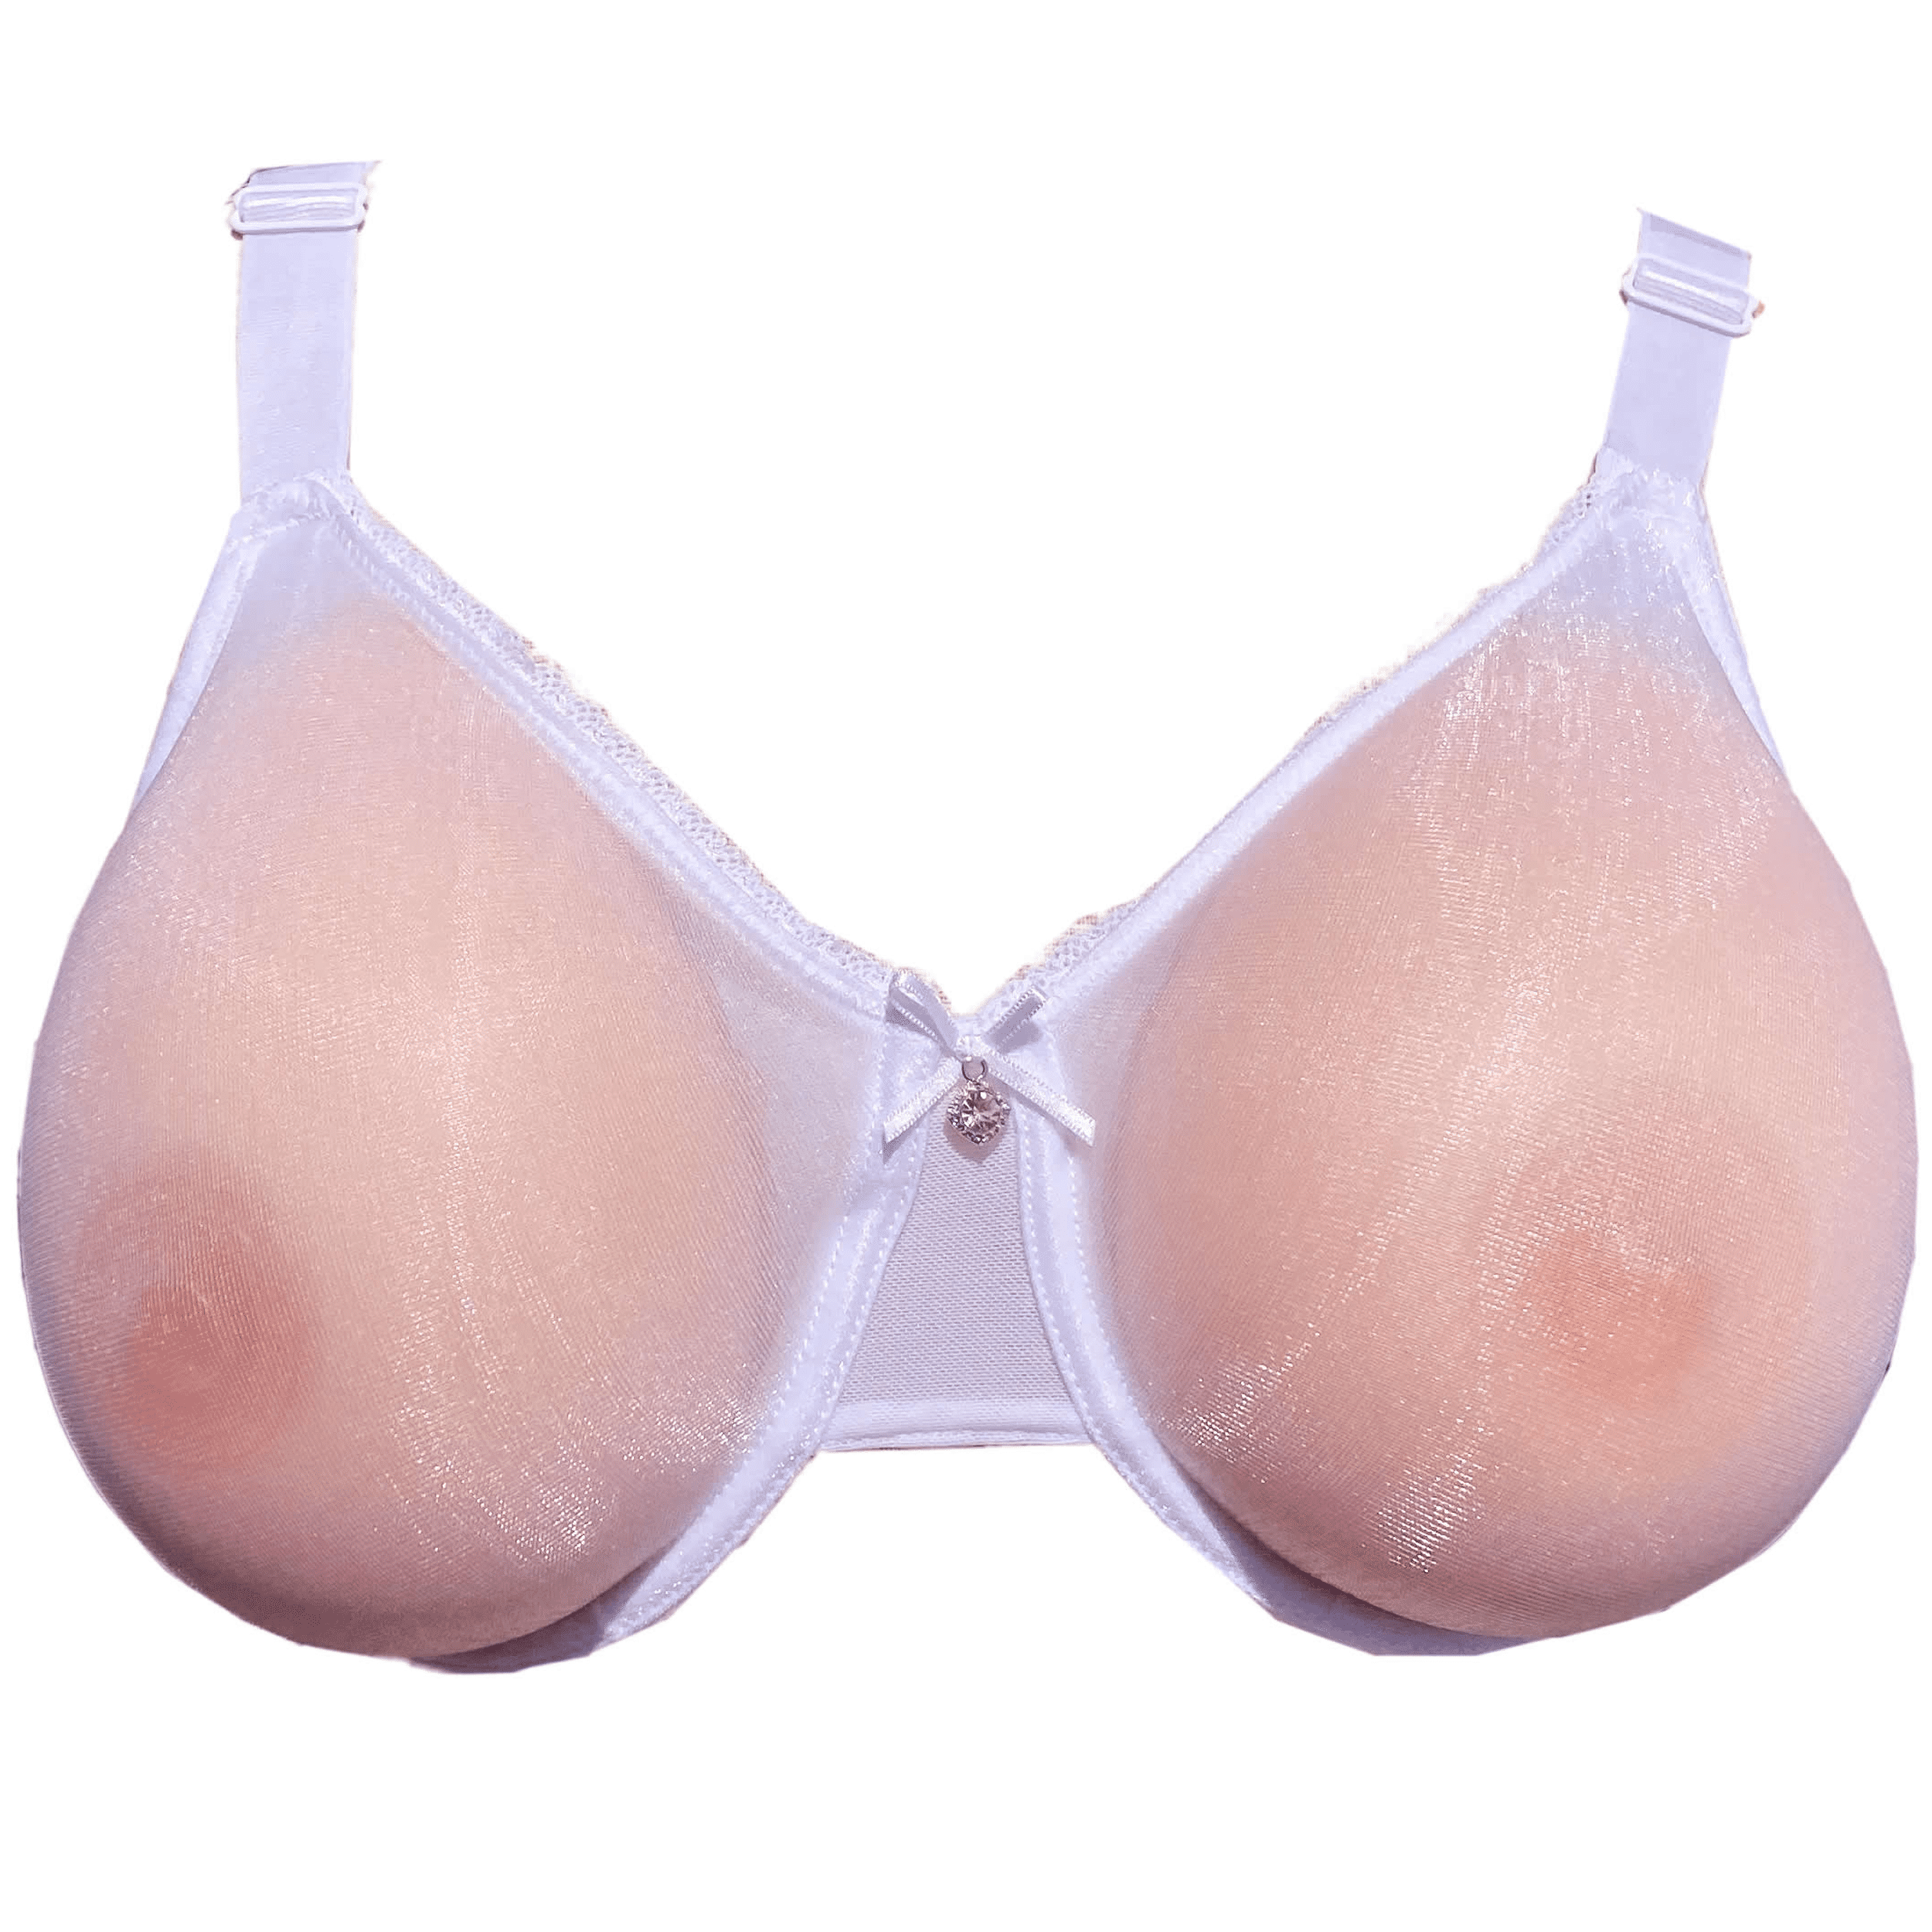 BIMEI See Through Bra CD Mastectomy Lingerie Bra Silicone Breast Forms  Prosthesis Pocket Bra with Steel Ring 9008,Beige,38D